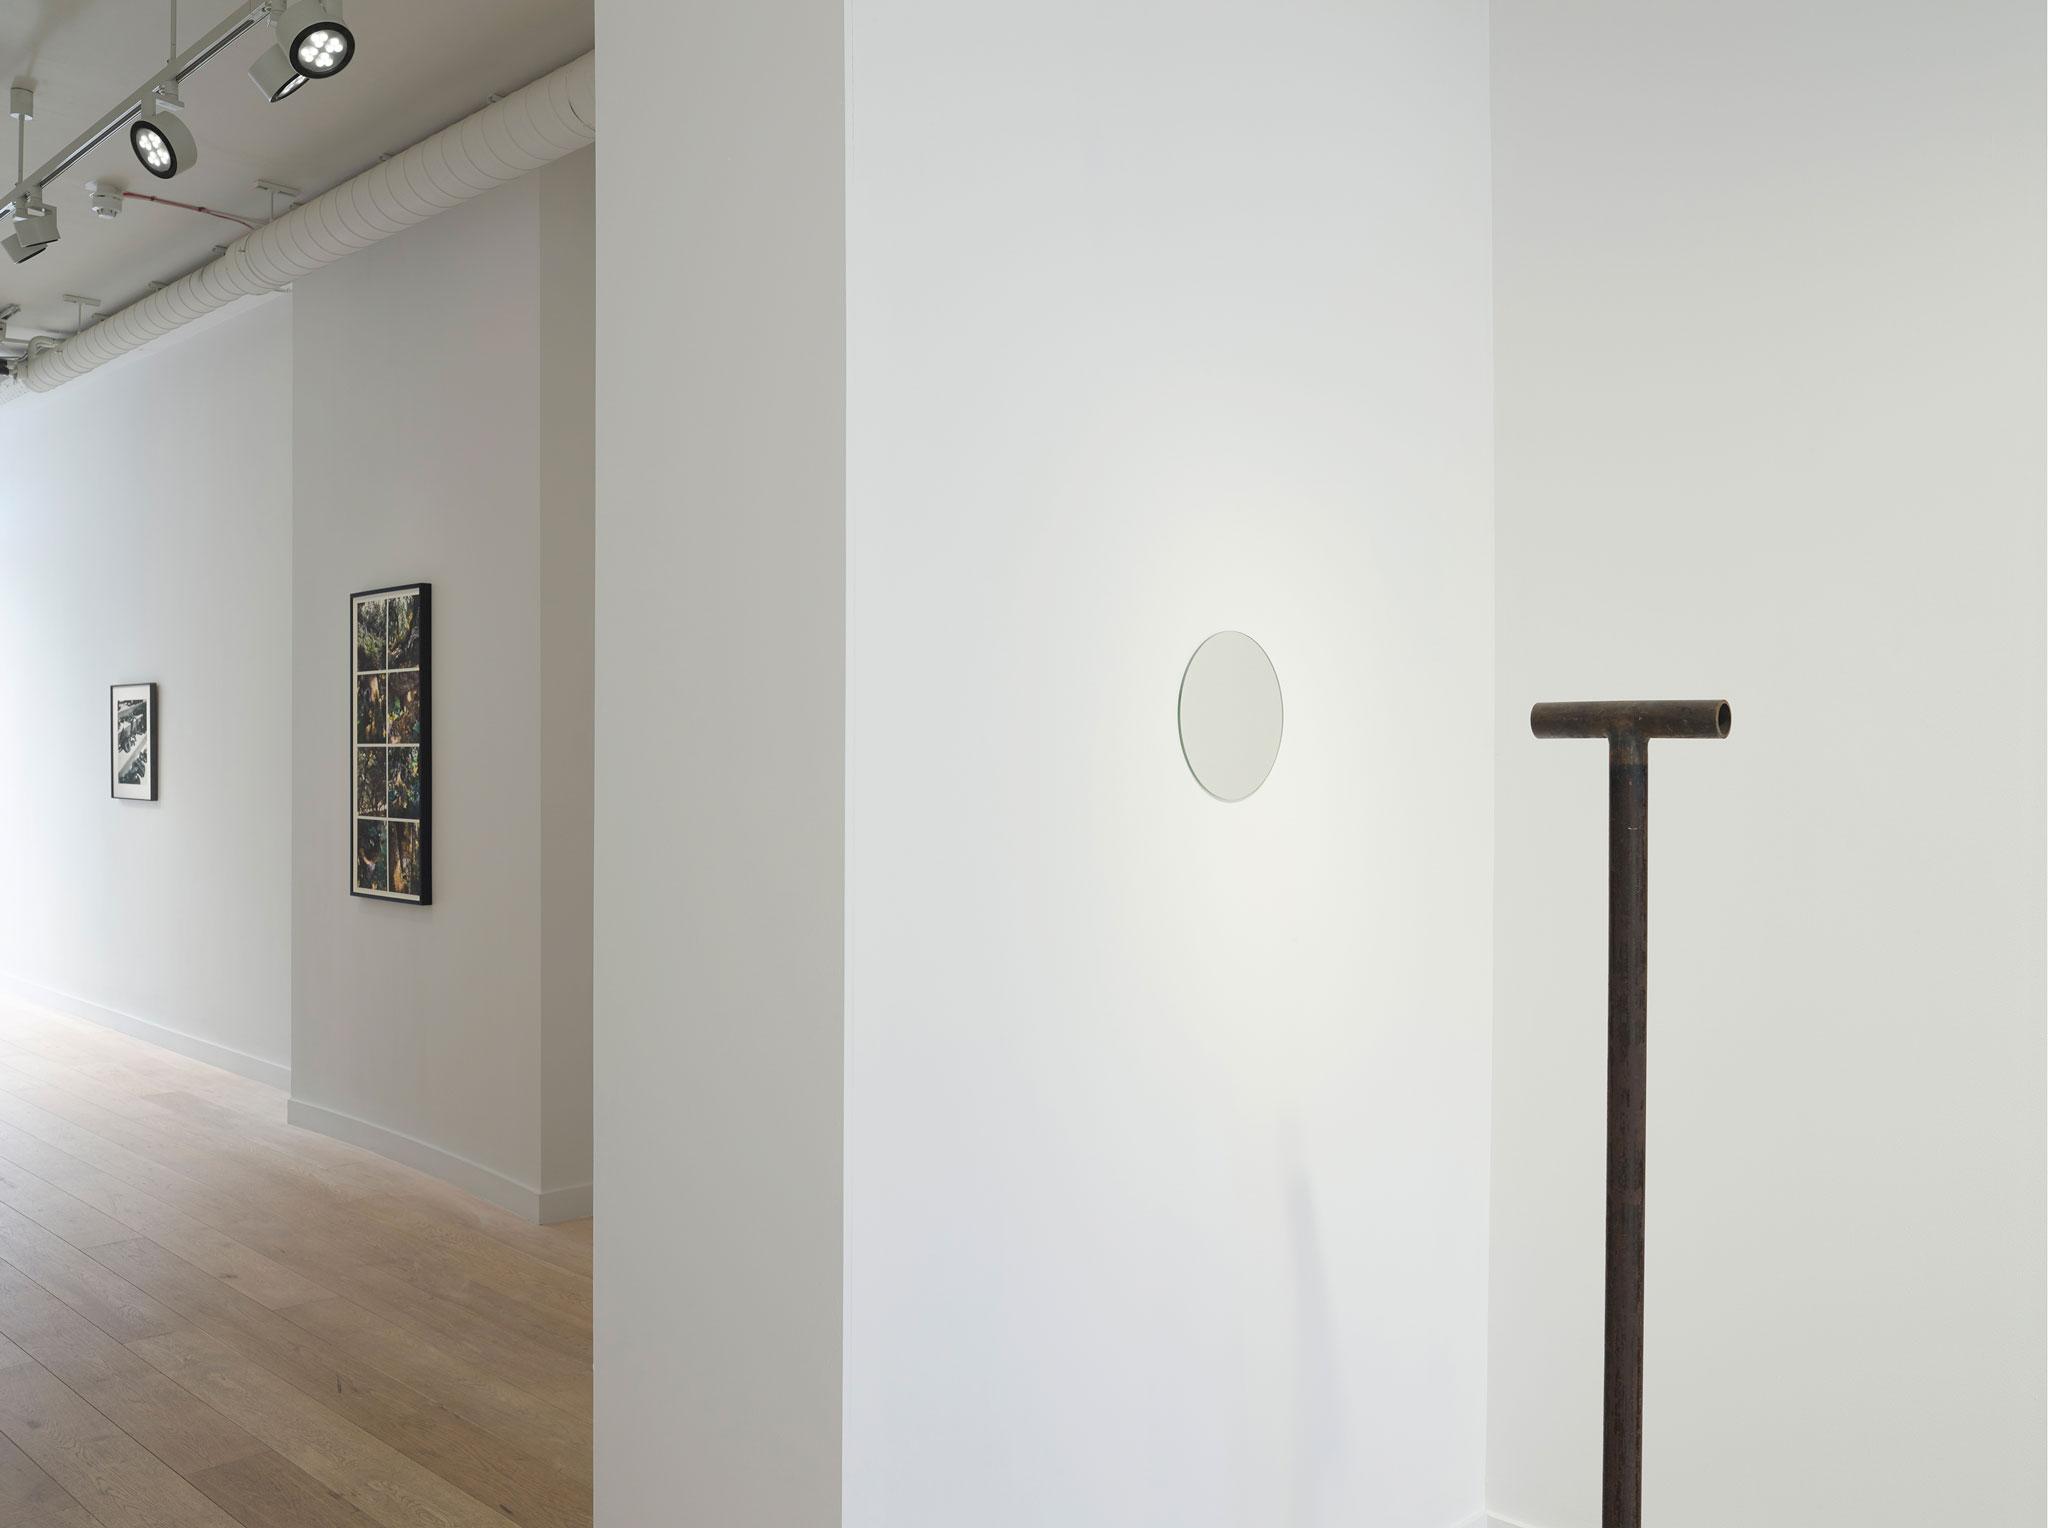 an art gallery with a sculpture made of metal pipe that points at a circular mirror on a wall